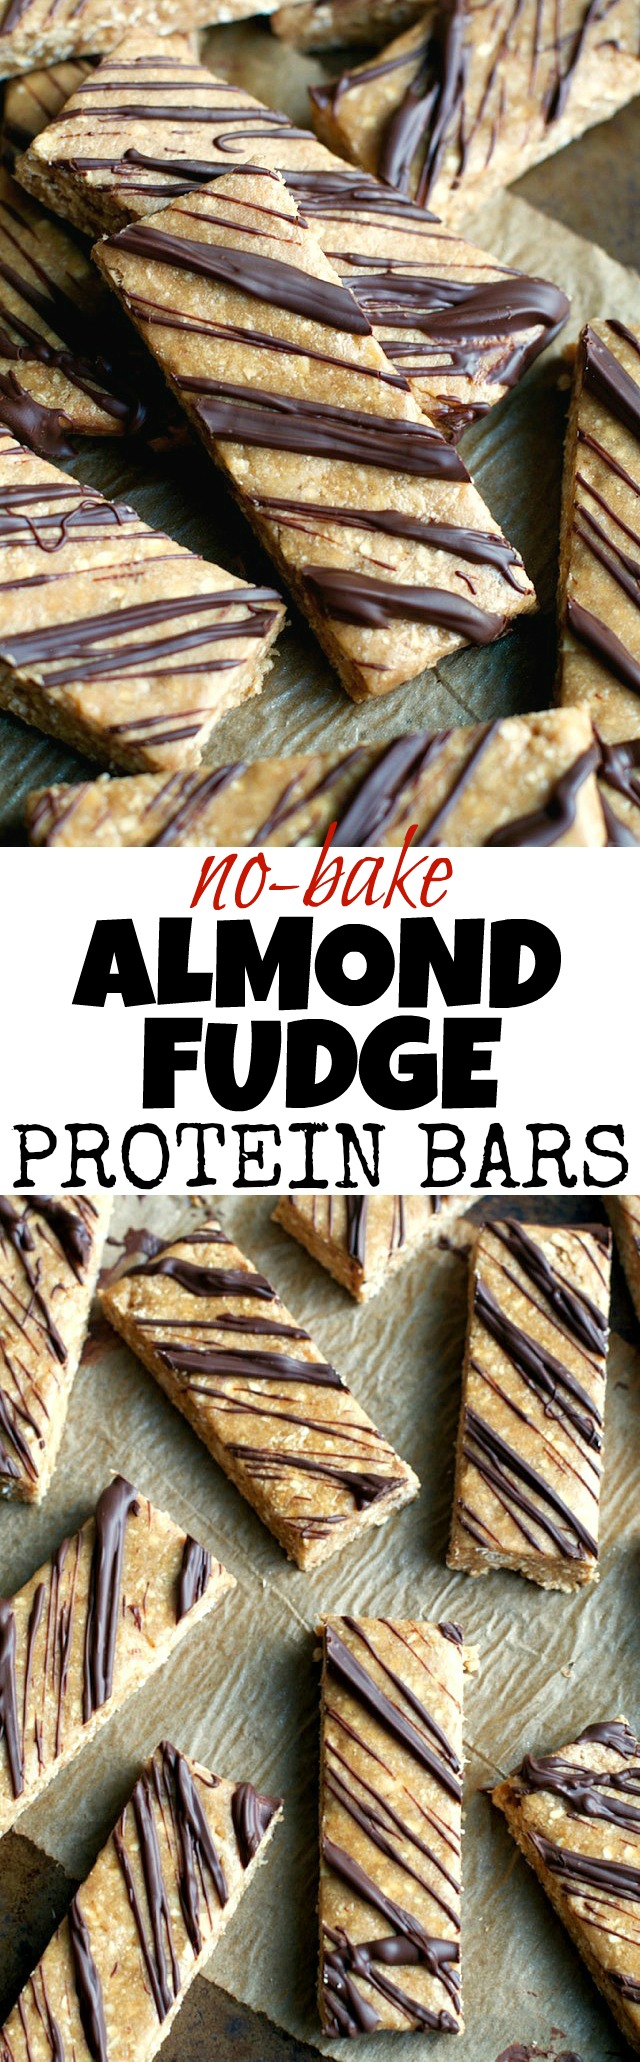 Give store-bought protein bars a run for their money with these soft and fudgy No Bake Almond Fudge Protein Bars! They're gluten-free, refined-sugar-free, vegan, and make a delicious healthy snack! | runningwithspoons.com #healthy #snack #recipe